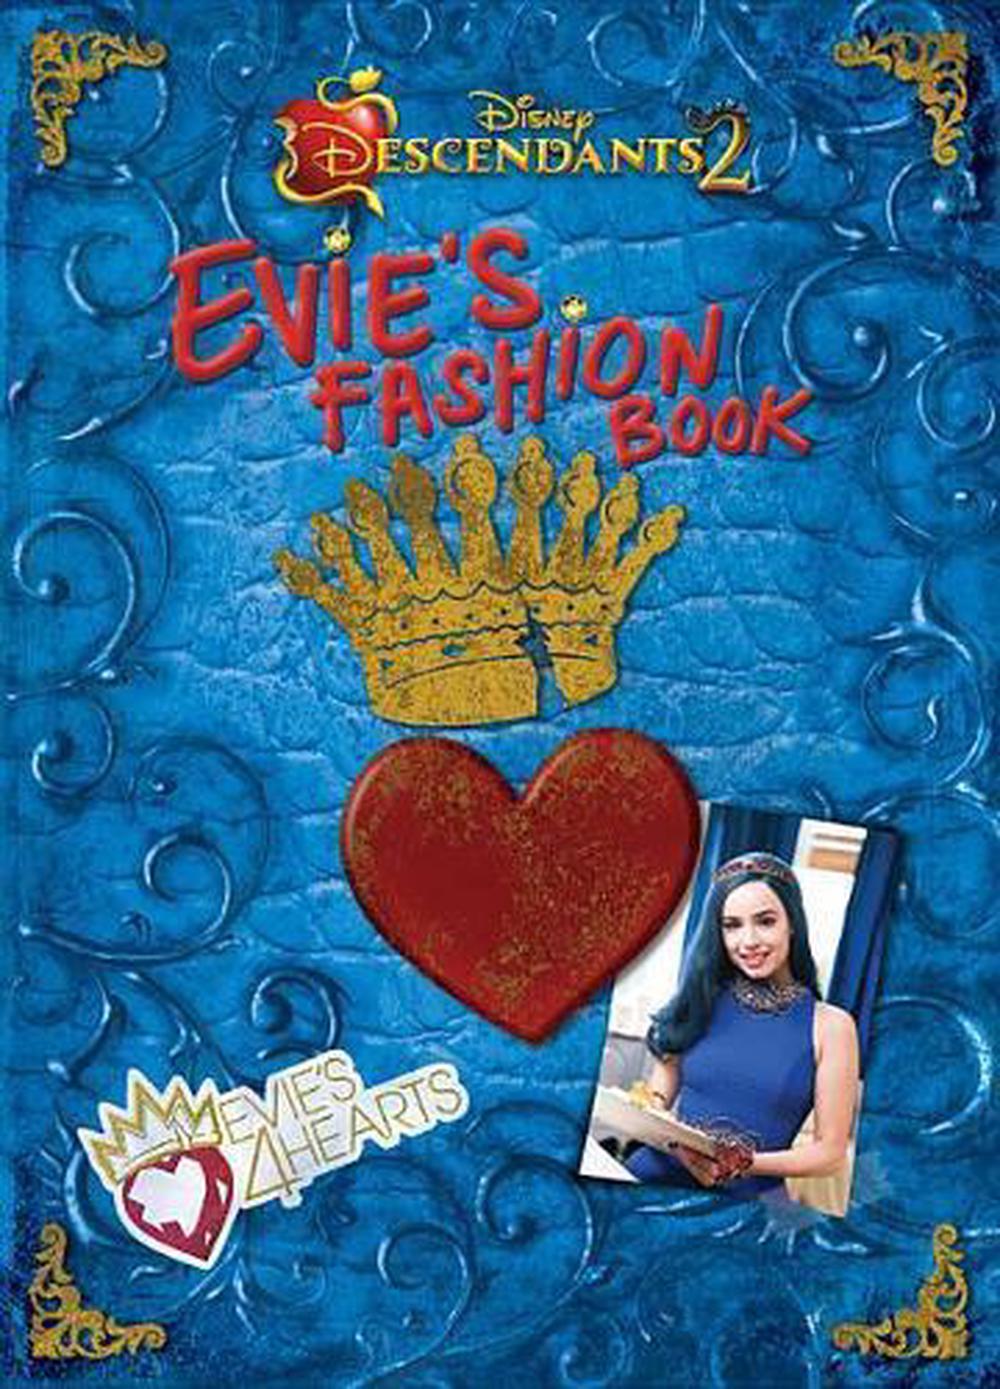 Buy　Fashion　The　Disney　Nile　Descendants　Book　Hardcover,　Book　online　Evie's　by　9781368002516　Group,　at